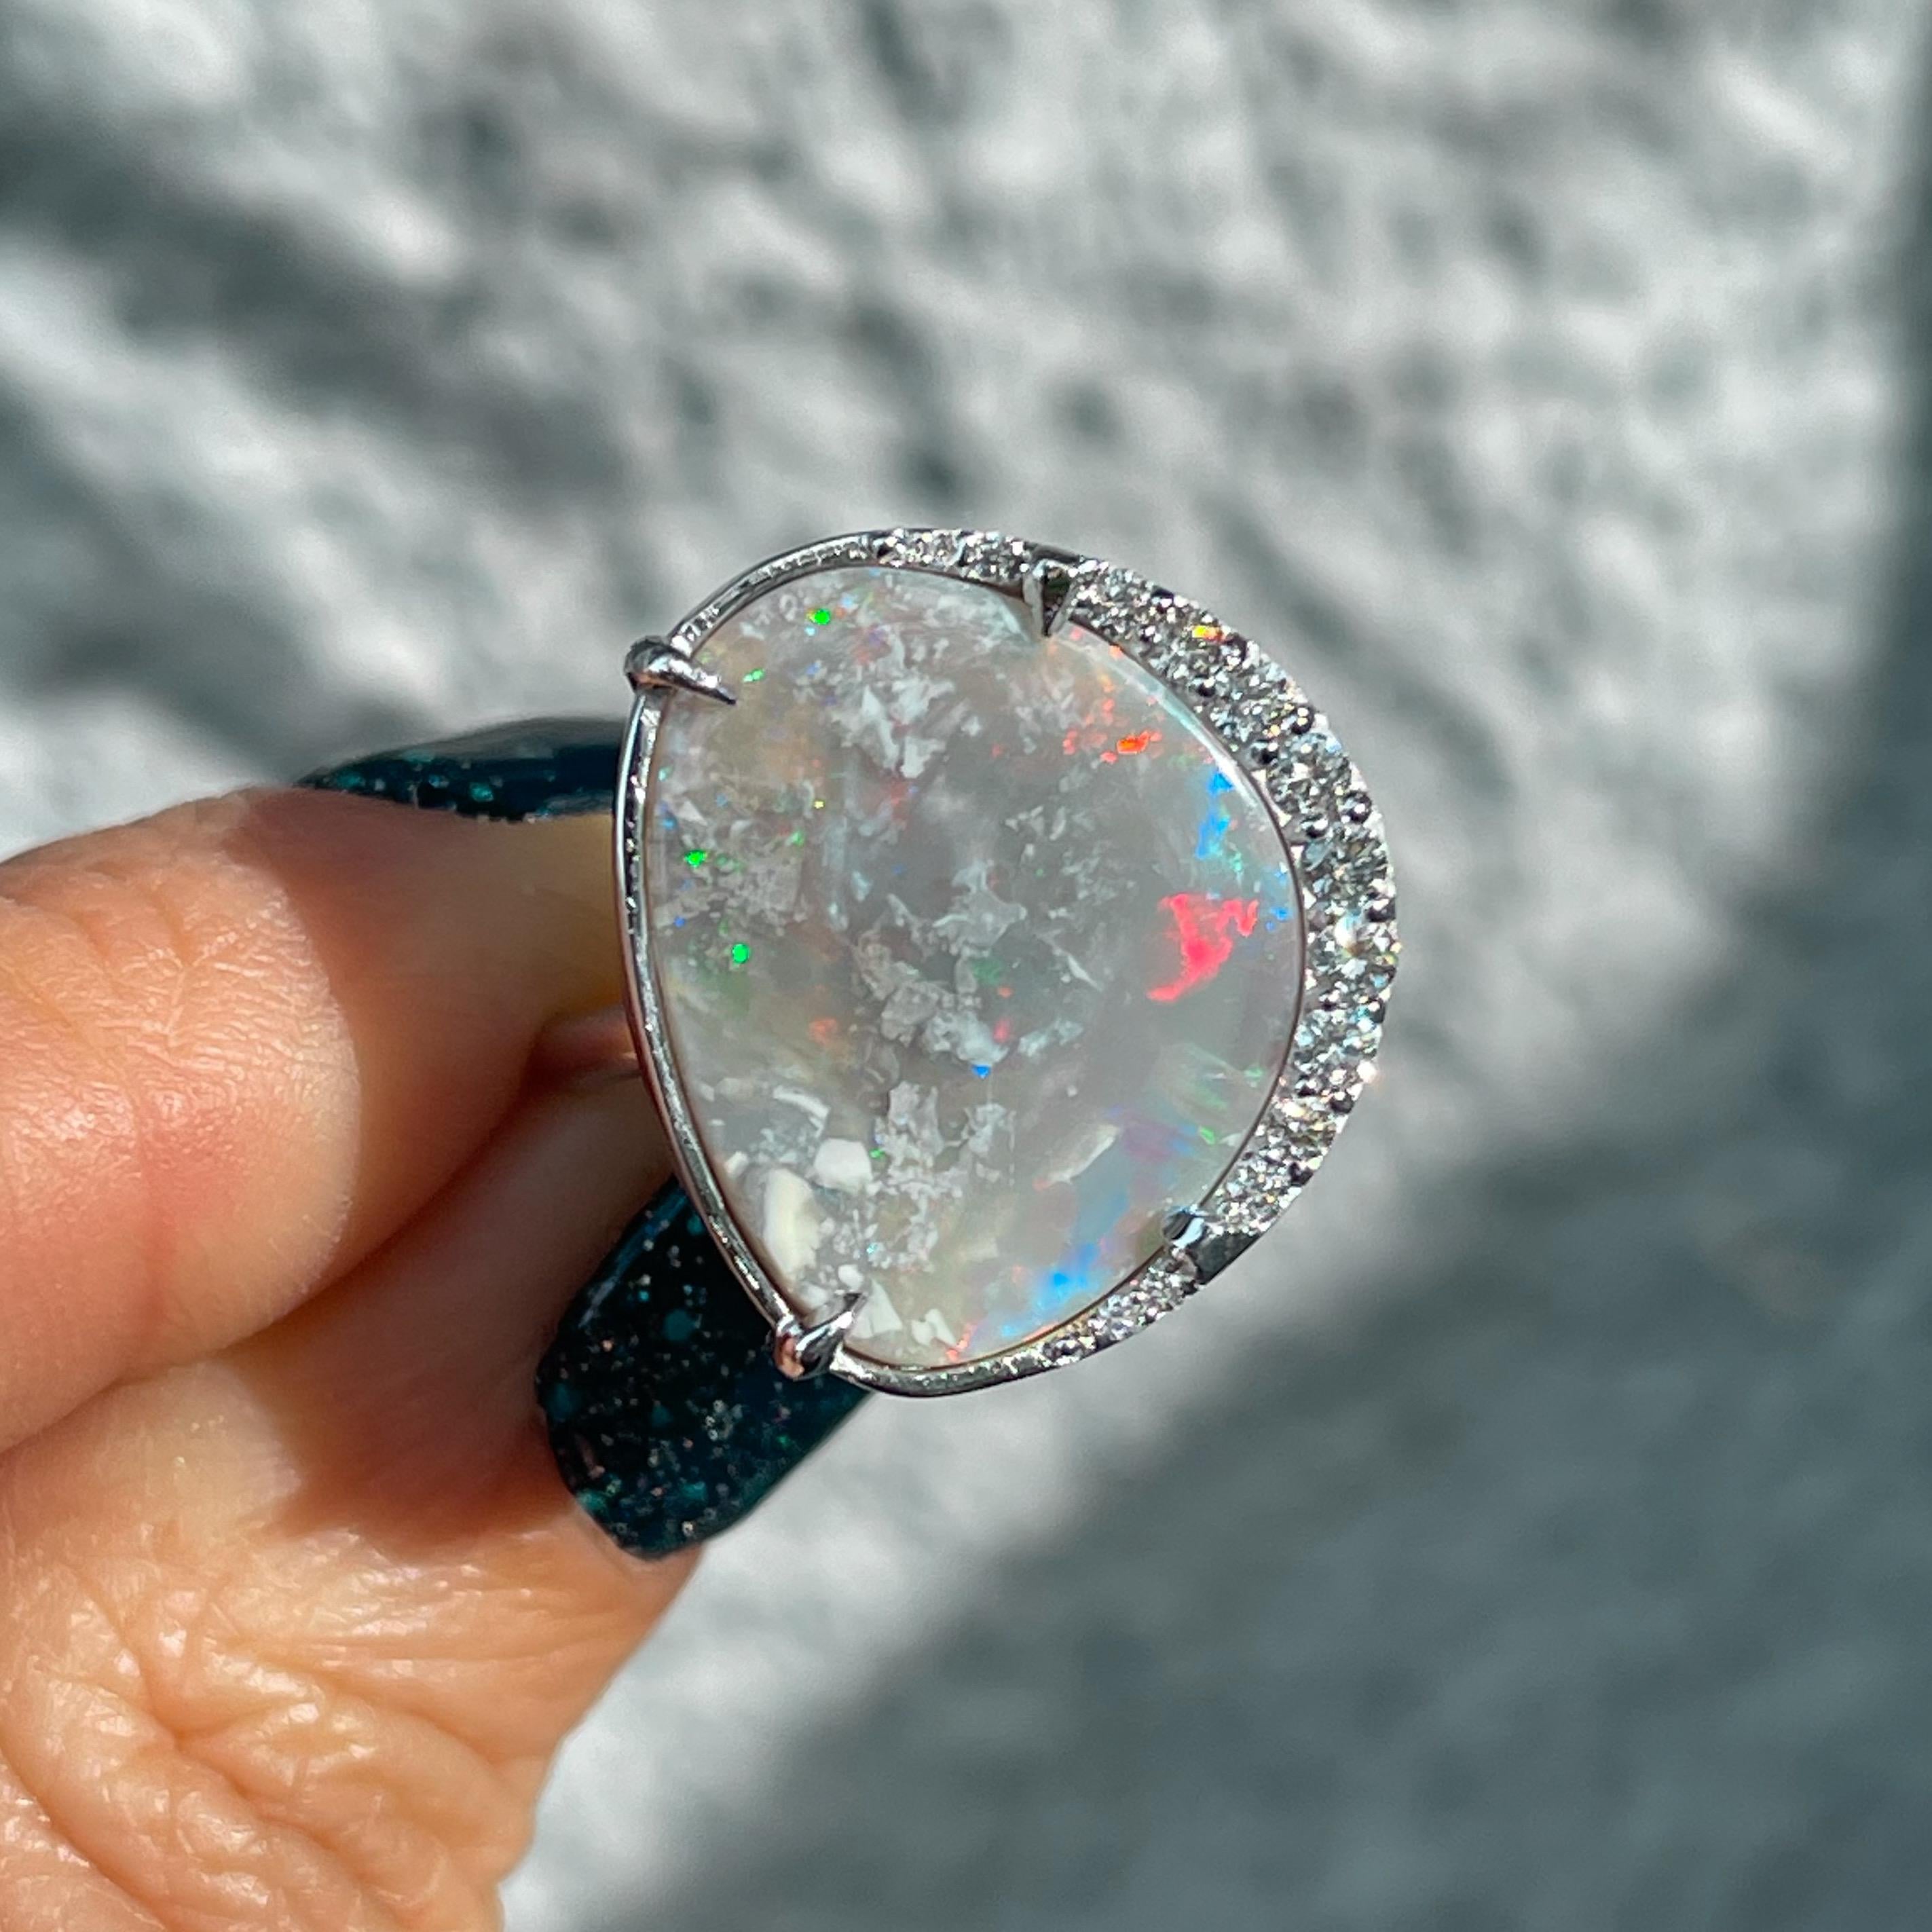 A myriad of color emerges through veiled grey in this Australian Opal Ring. Set in 14k white gold, the opal and diamond ring tenders a stark canvas. Against its white gold mounting, the colors within the Semi Black Opal spark with distinction. A